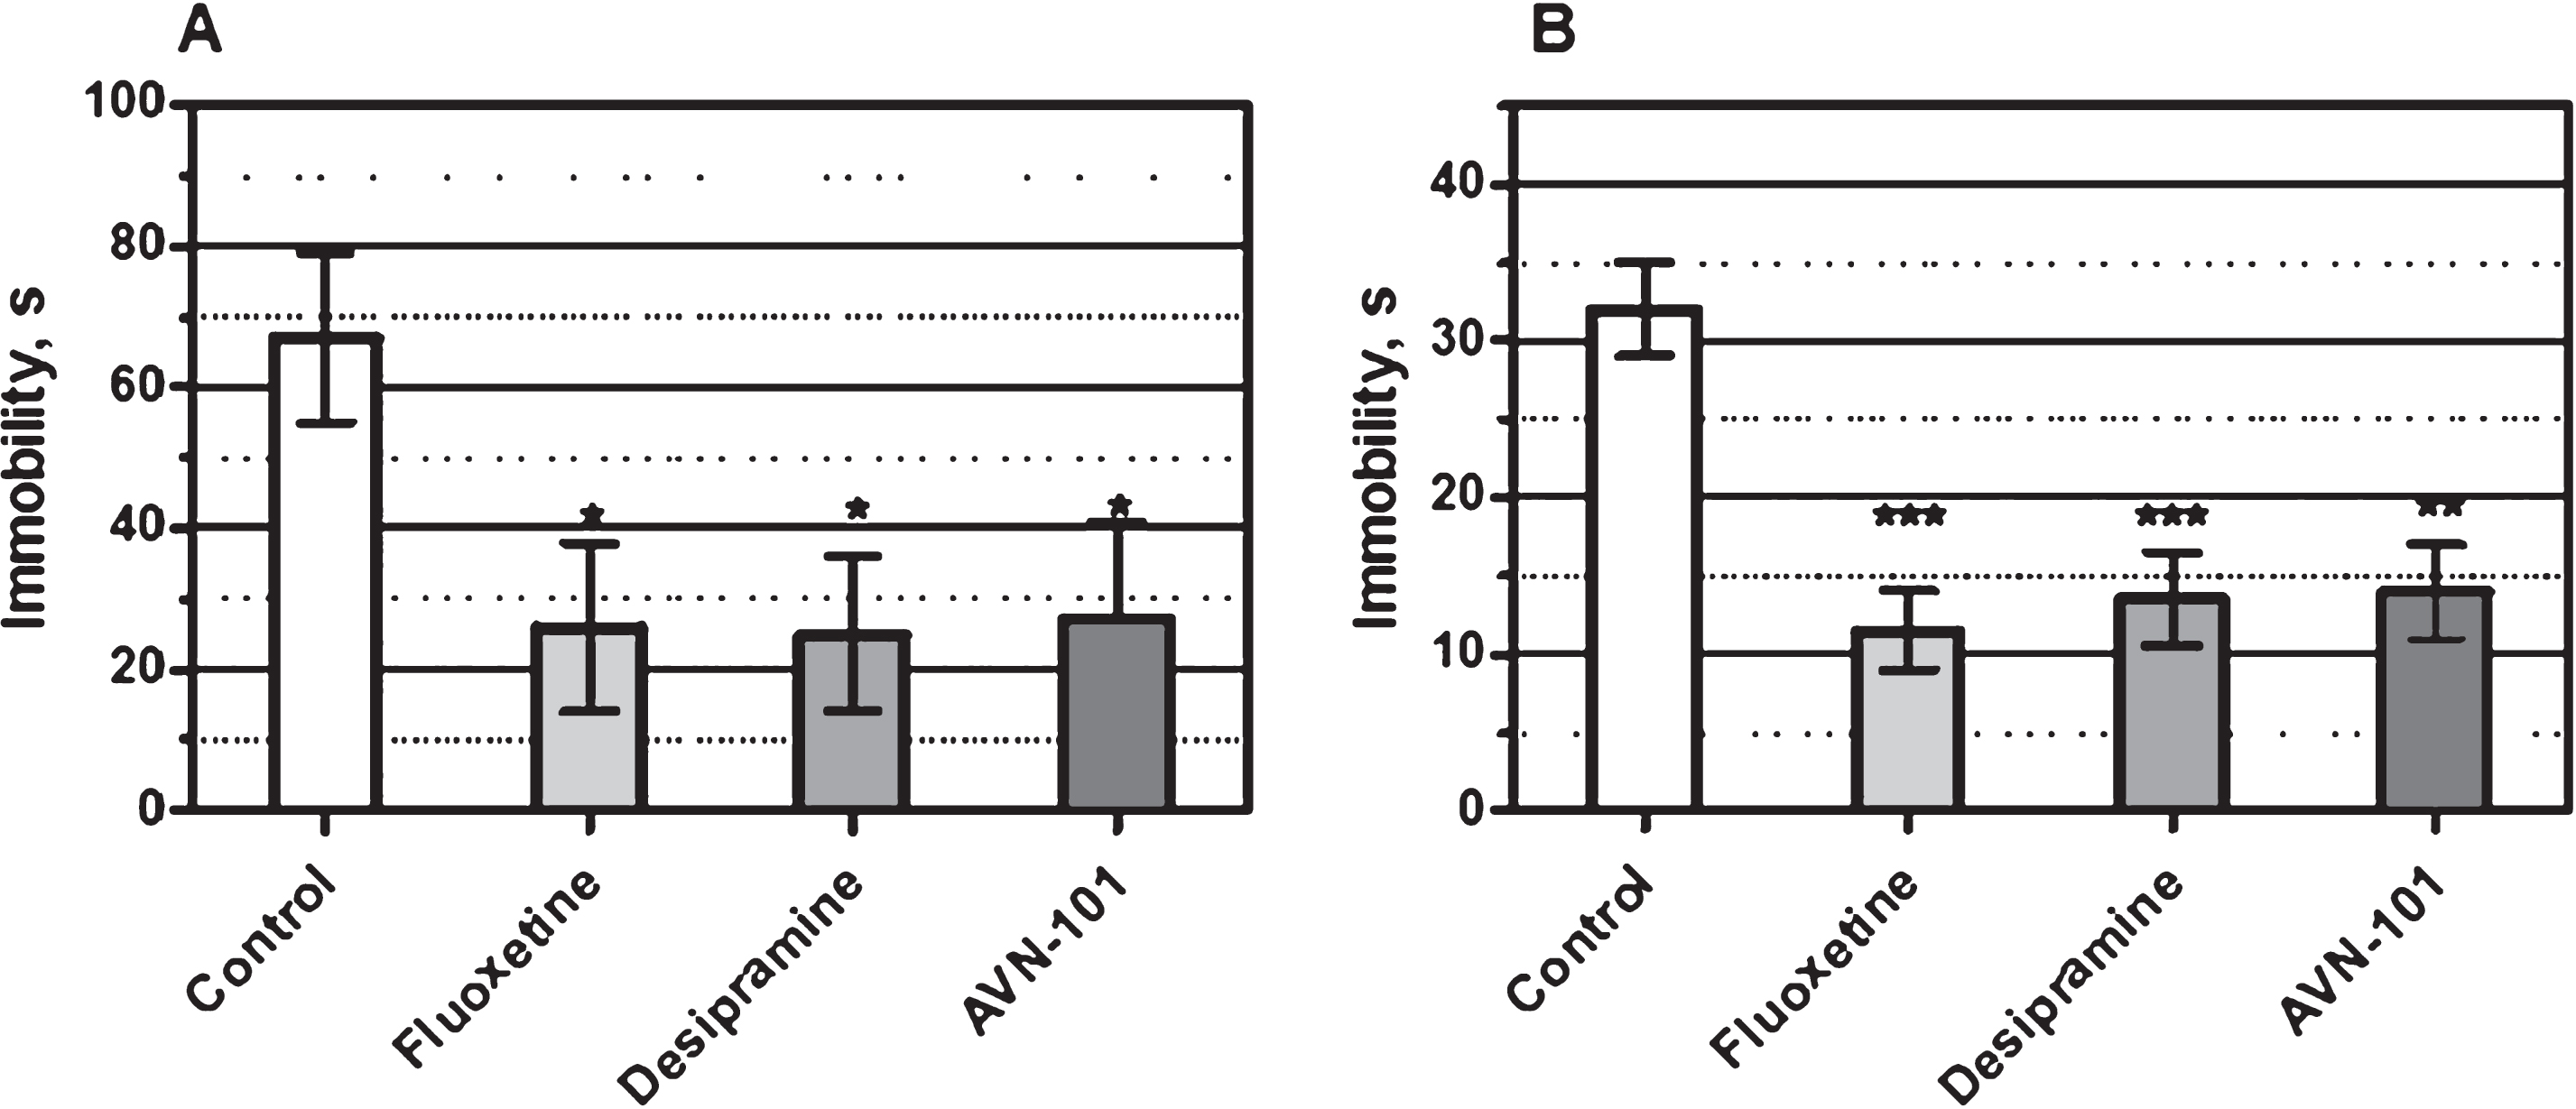 Effect of Fluoxetine and Desipramine (both at 15 mg/kg) and AVN-101 (0.05 mg/kg) on mice immobility in (A) the Porsolt forced swim test and (B) tail suspension test. *p < 0.05, **p < 0.01, ***p < 0.001 (Student t-test).